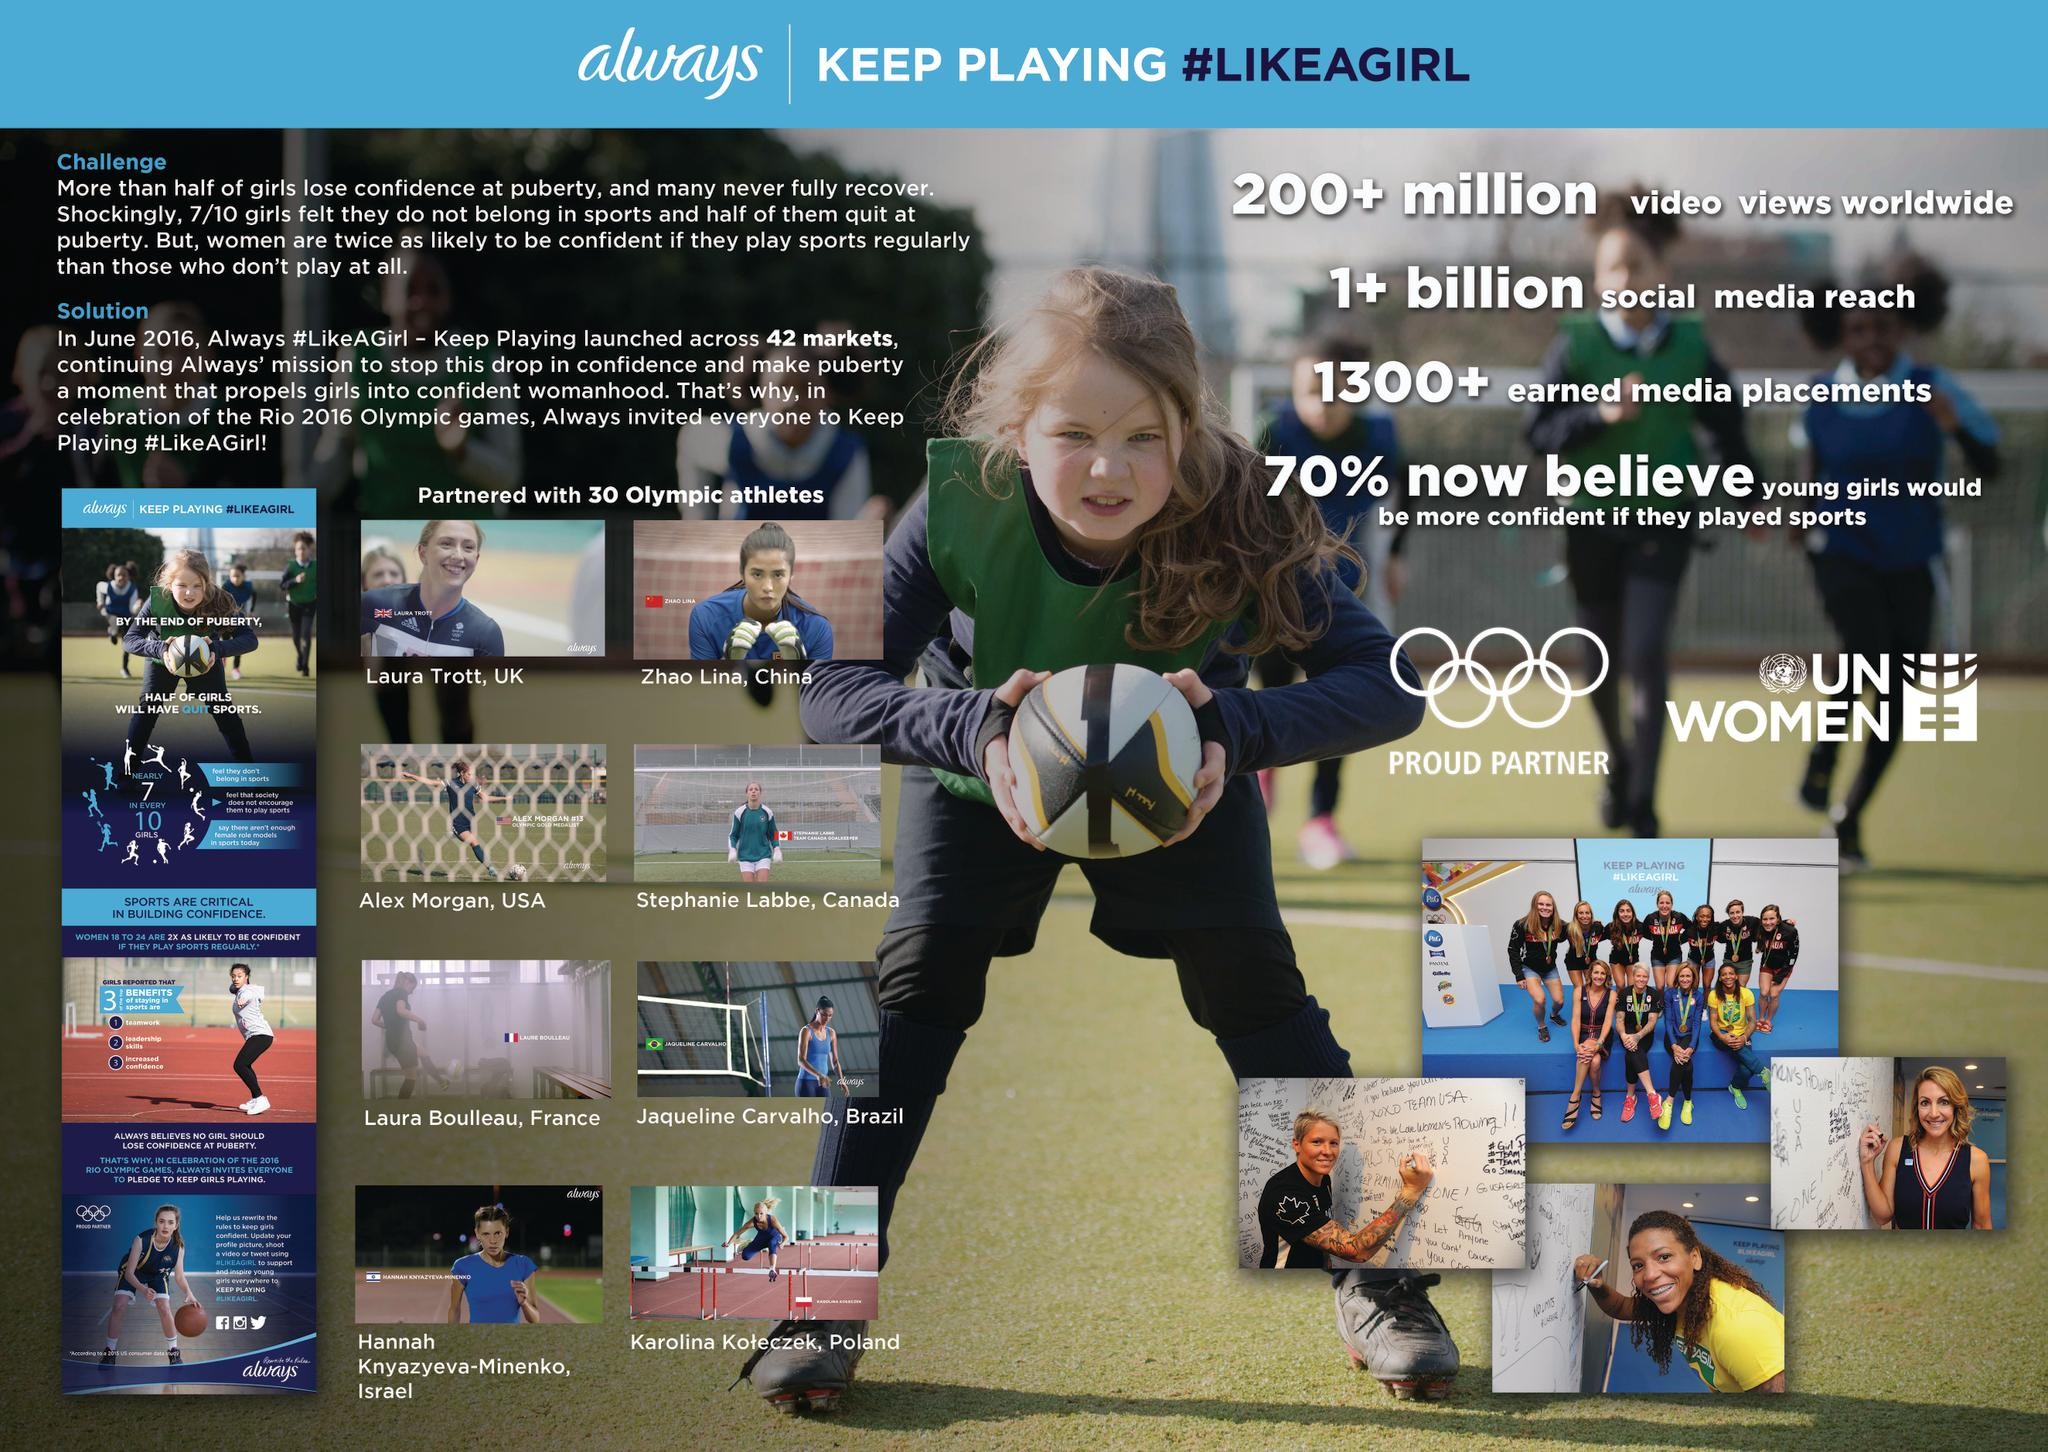 ALWAYS #LIKEAGIRL:  FROM ICONIC CAMPAIGN TO INSPIRING SOCIETAL CHANGE